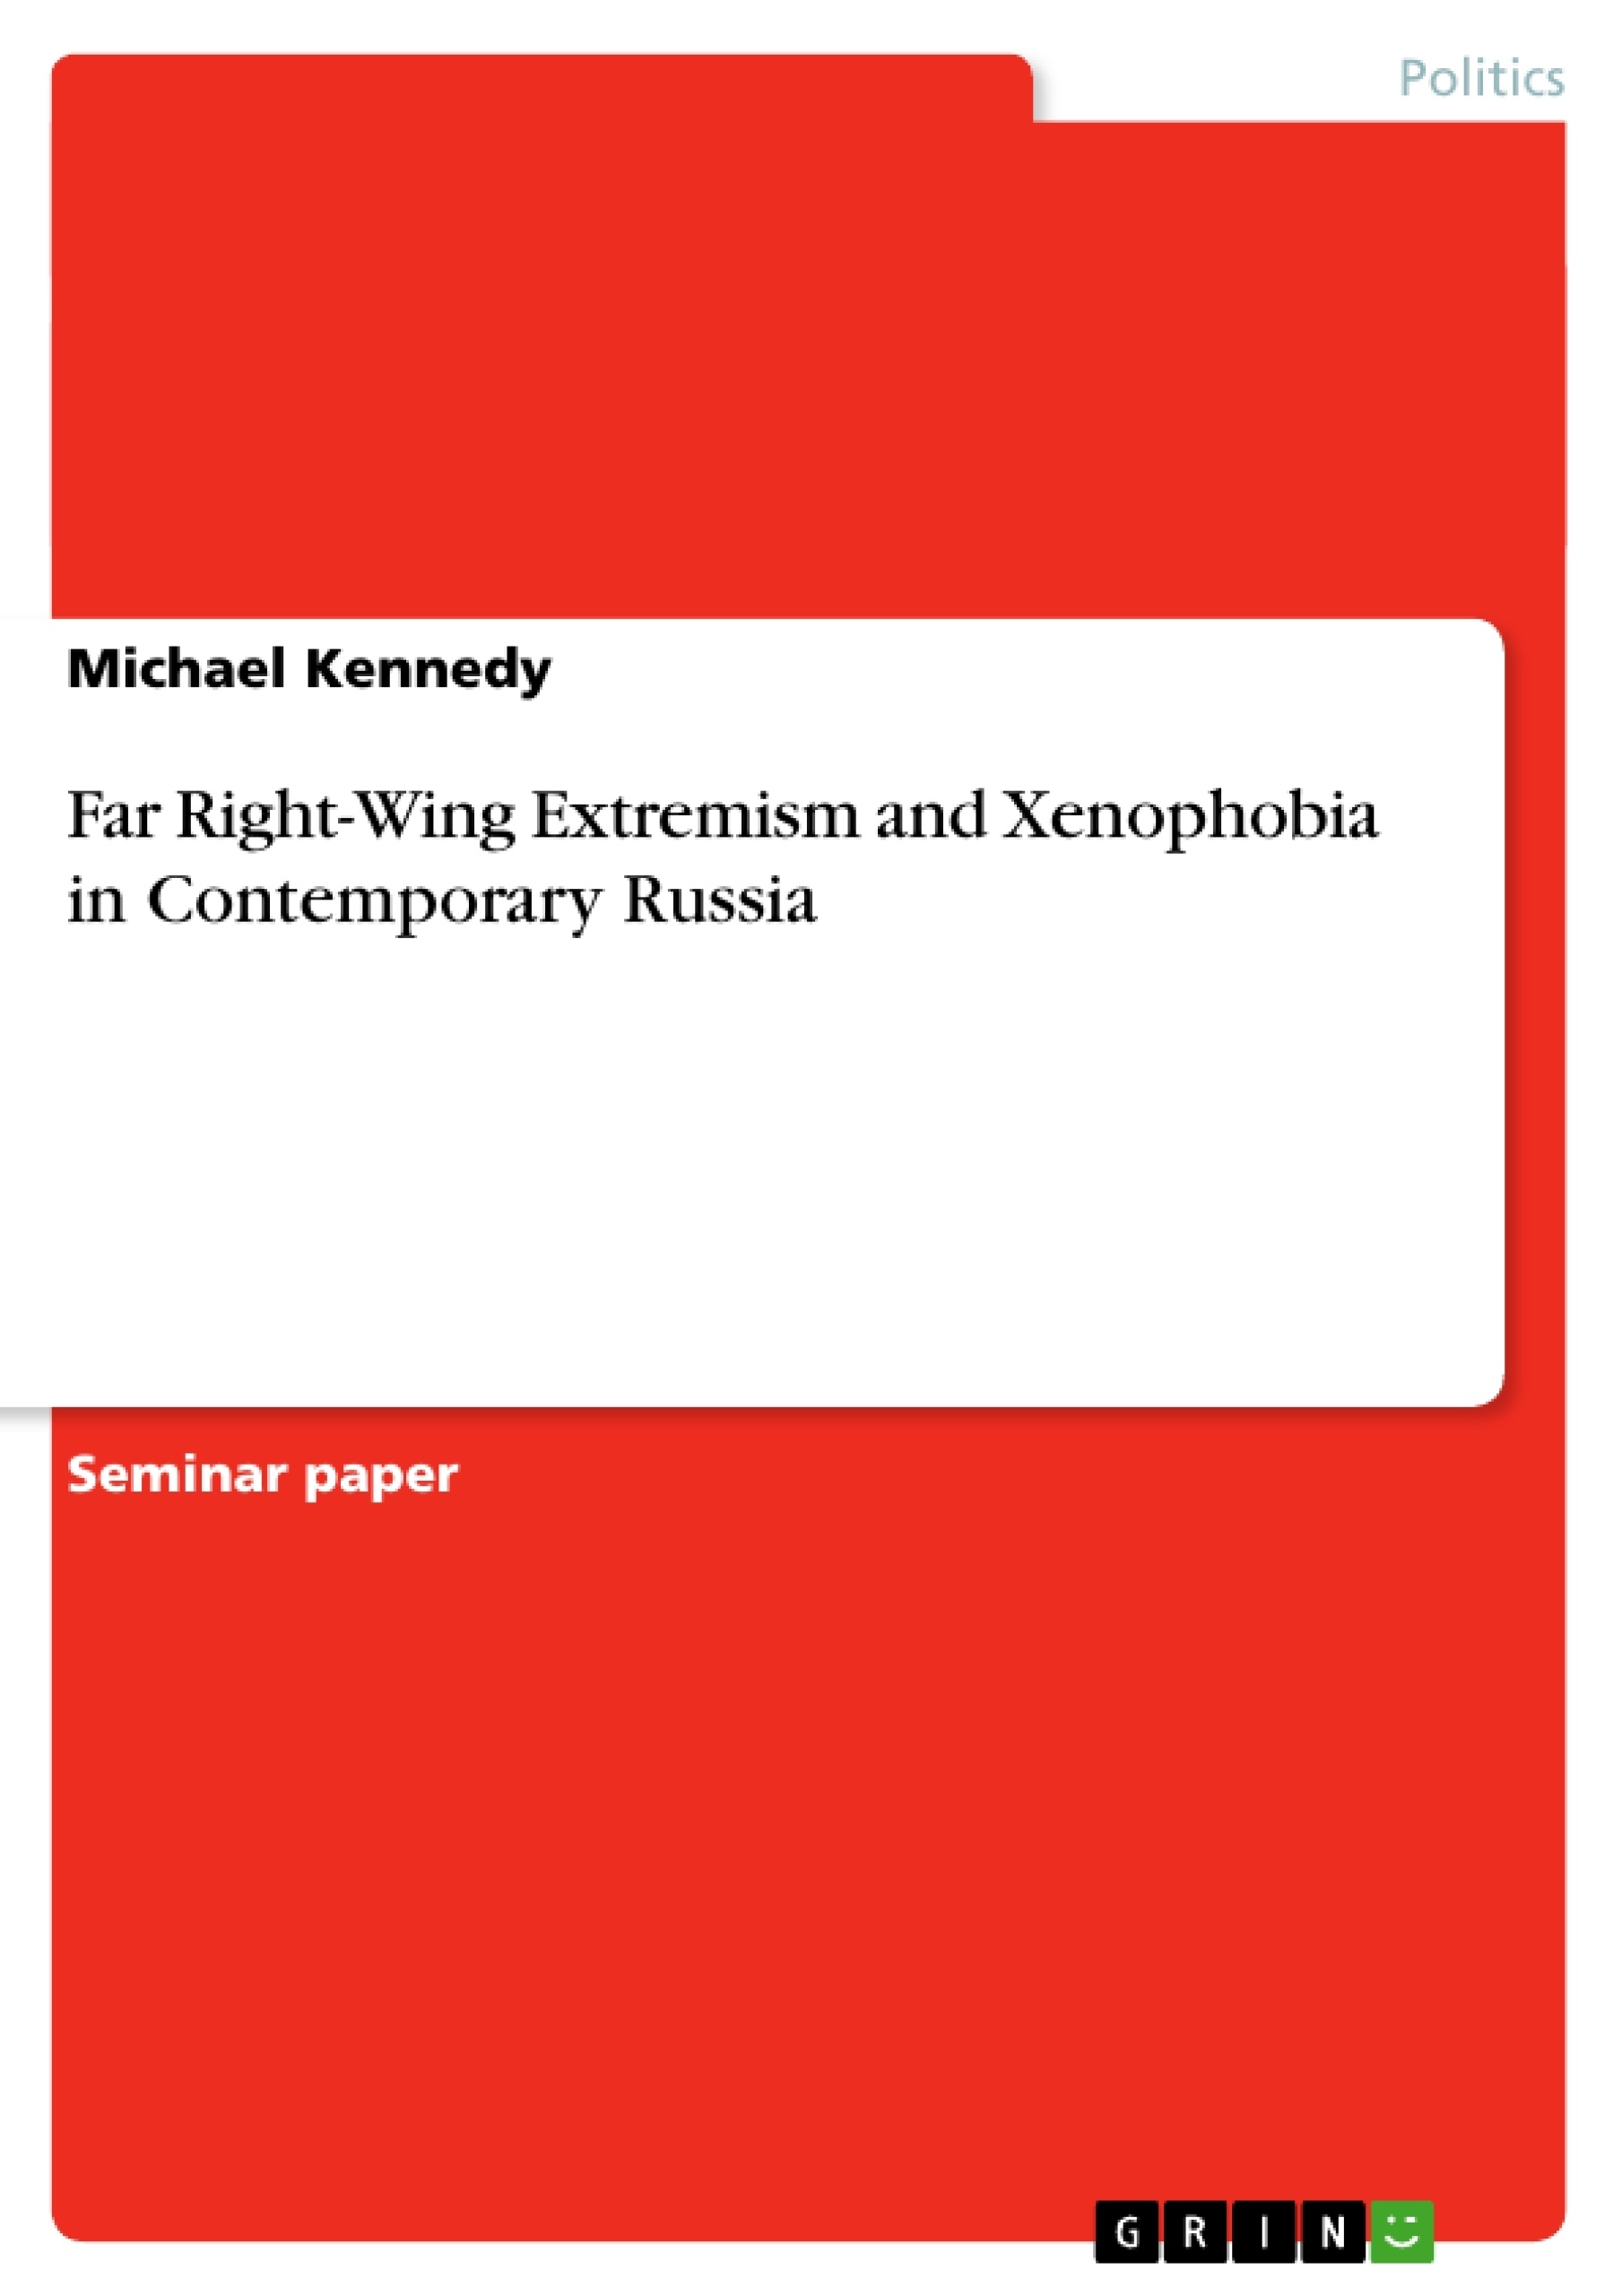 Titre: Far Right-Wing Extremism and Xenophobia in Contemporary Russia